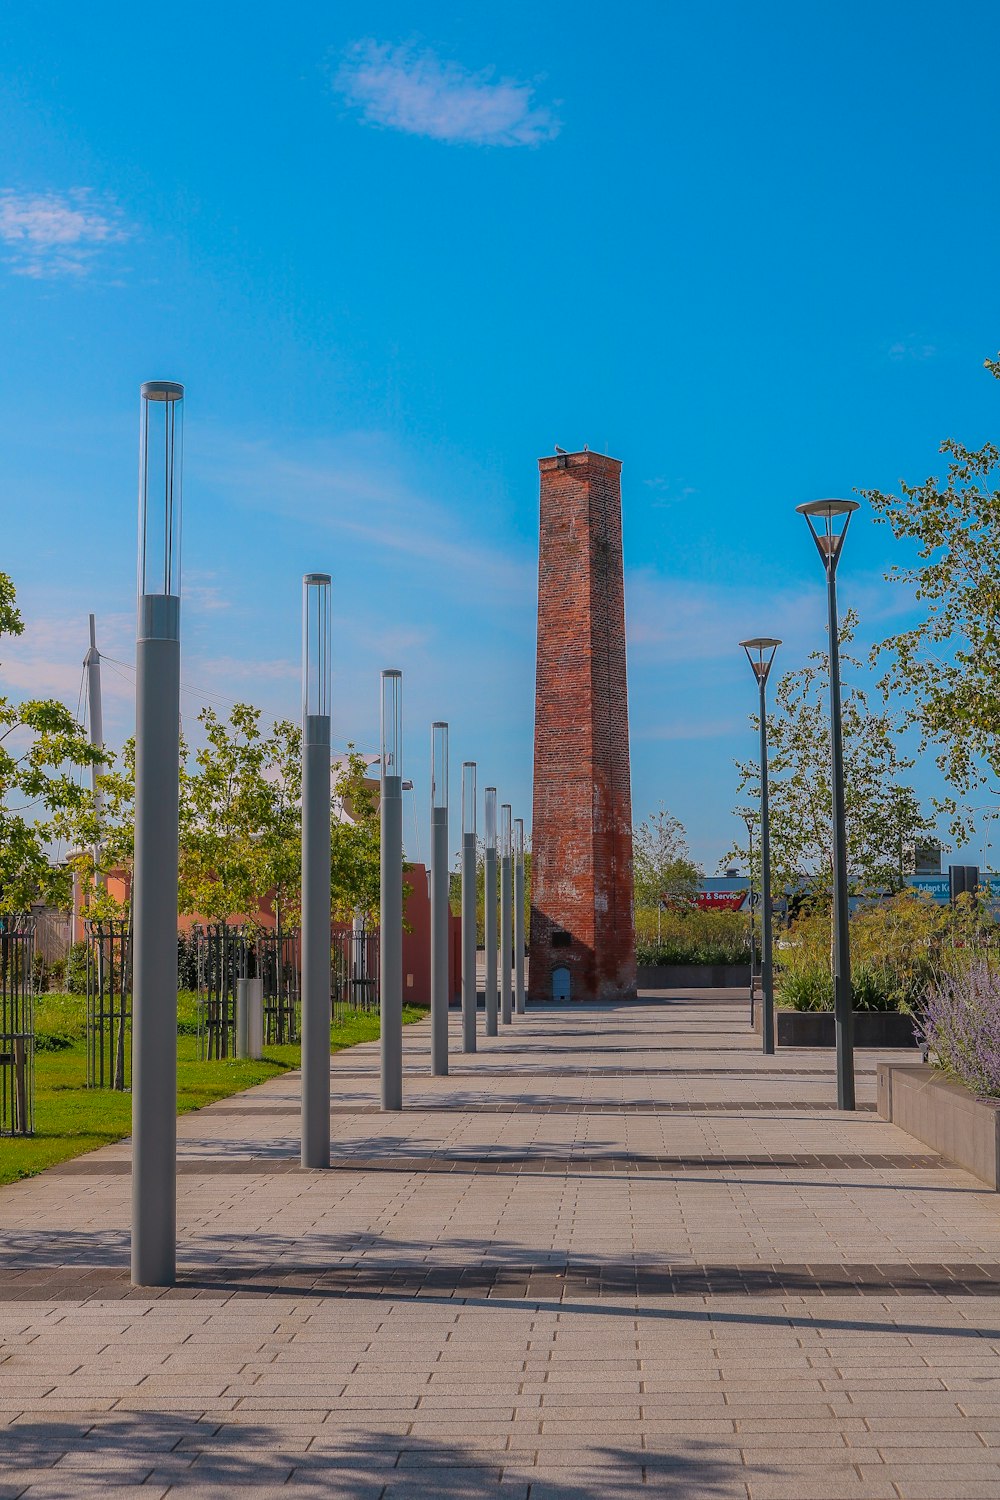 a walkway lined with metal poles and a brick tower in the background